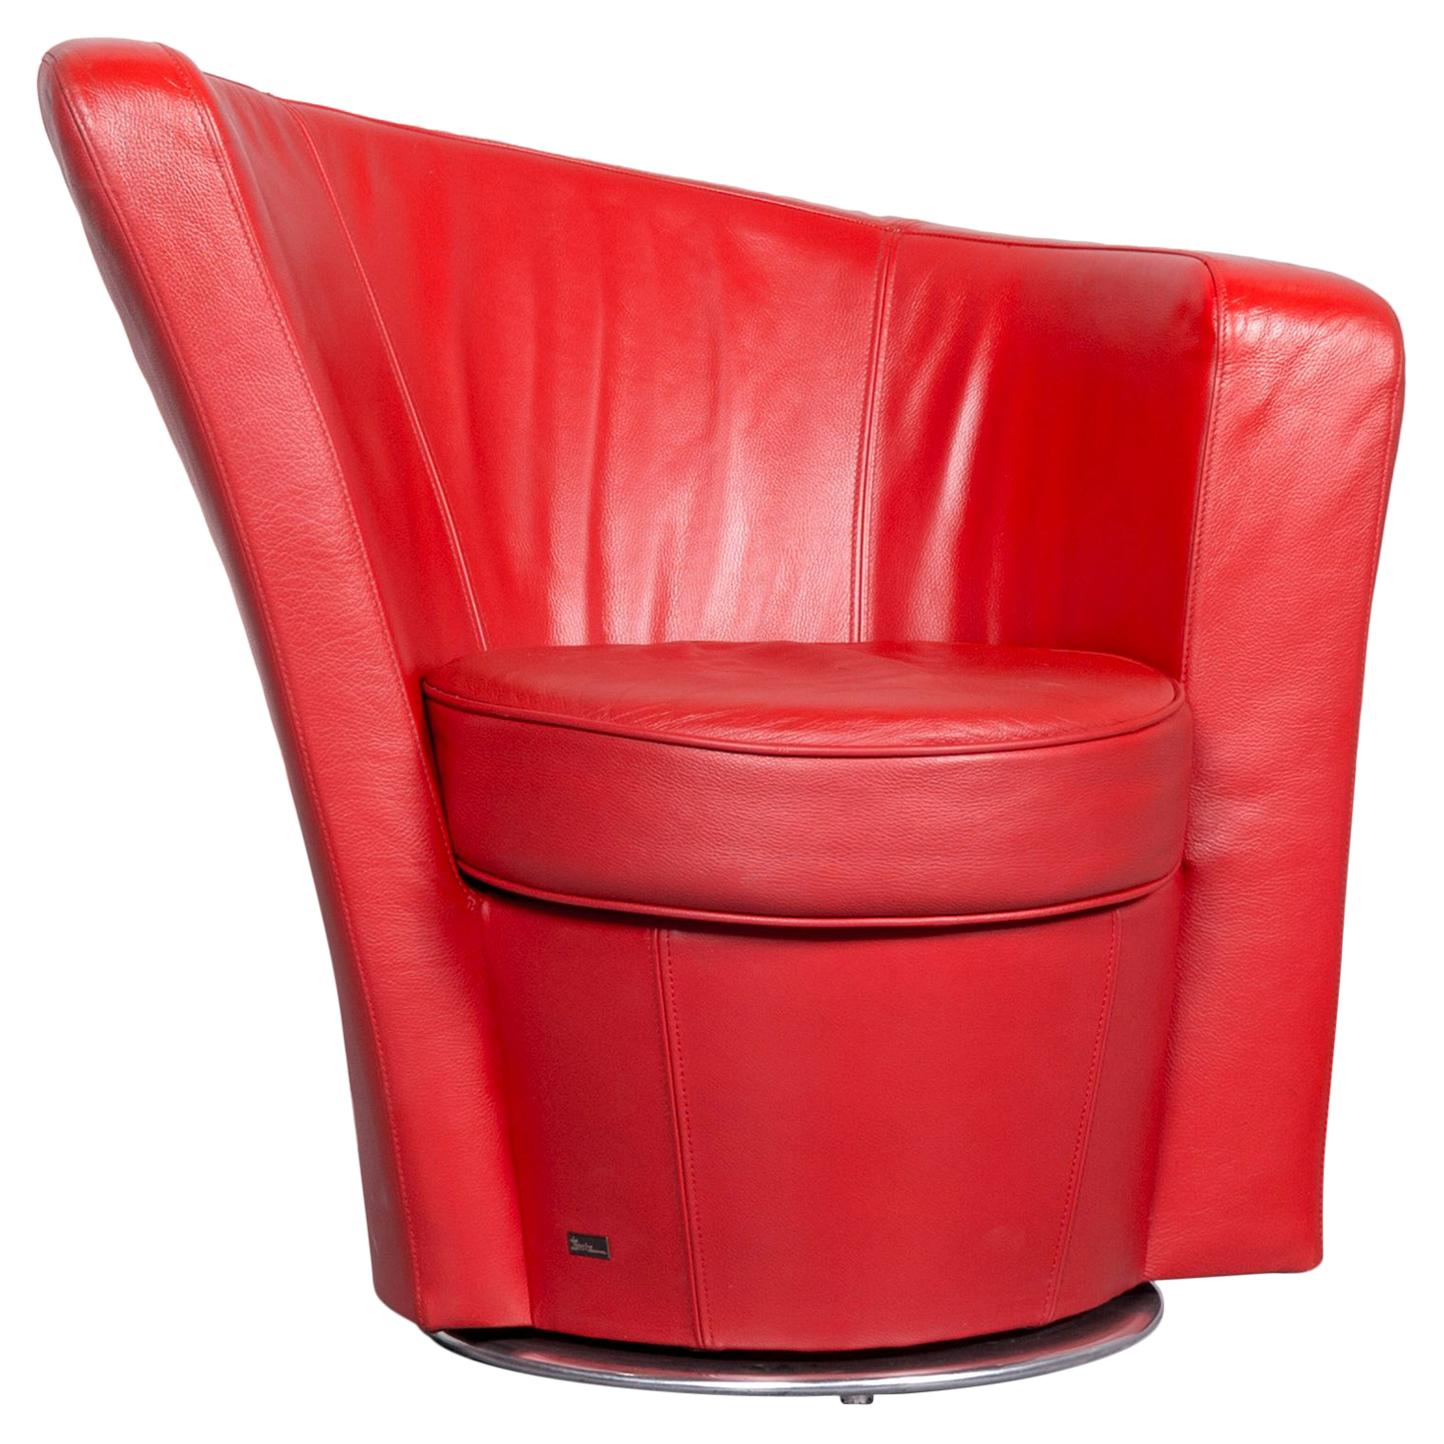 Bretz Eves Island Leather Armchair Set Red One-Seat Chair For Sale